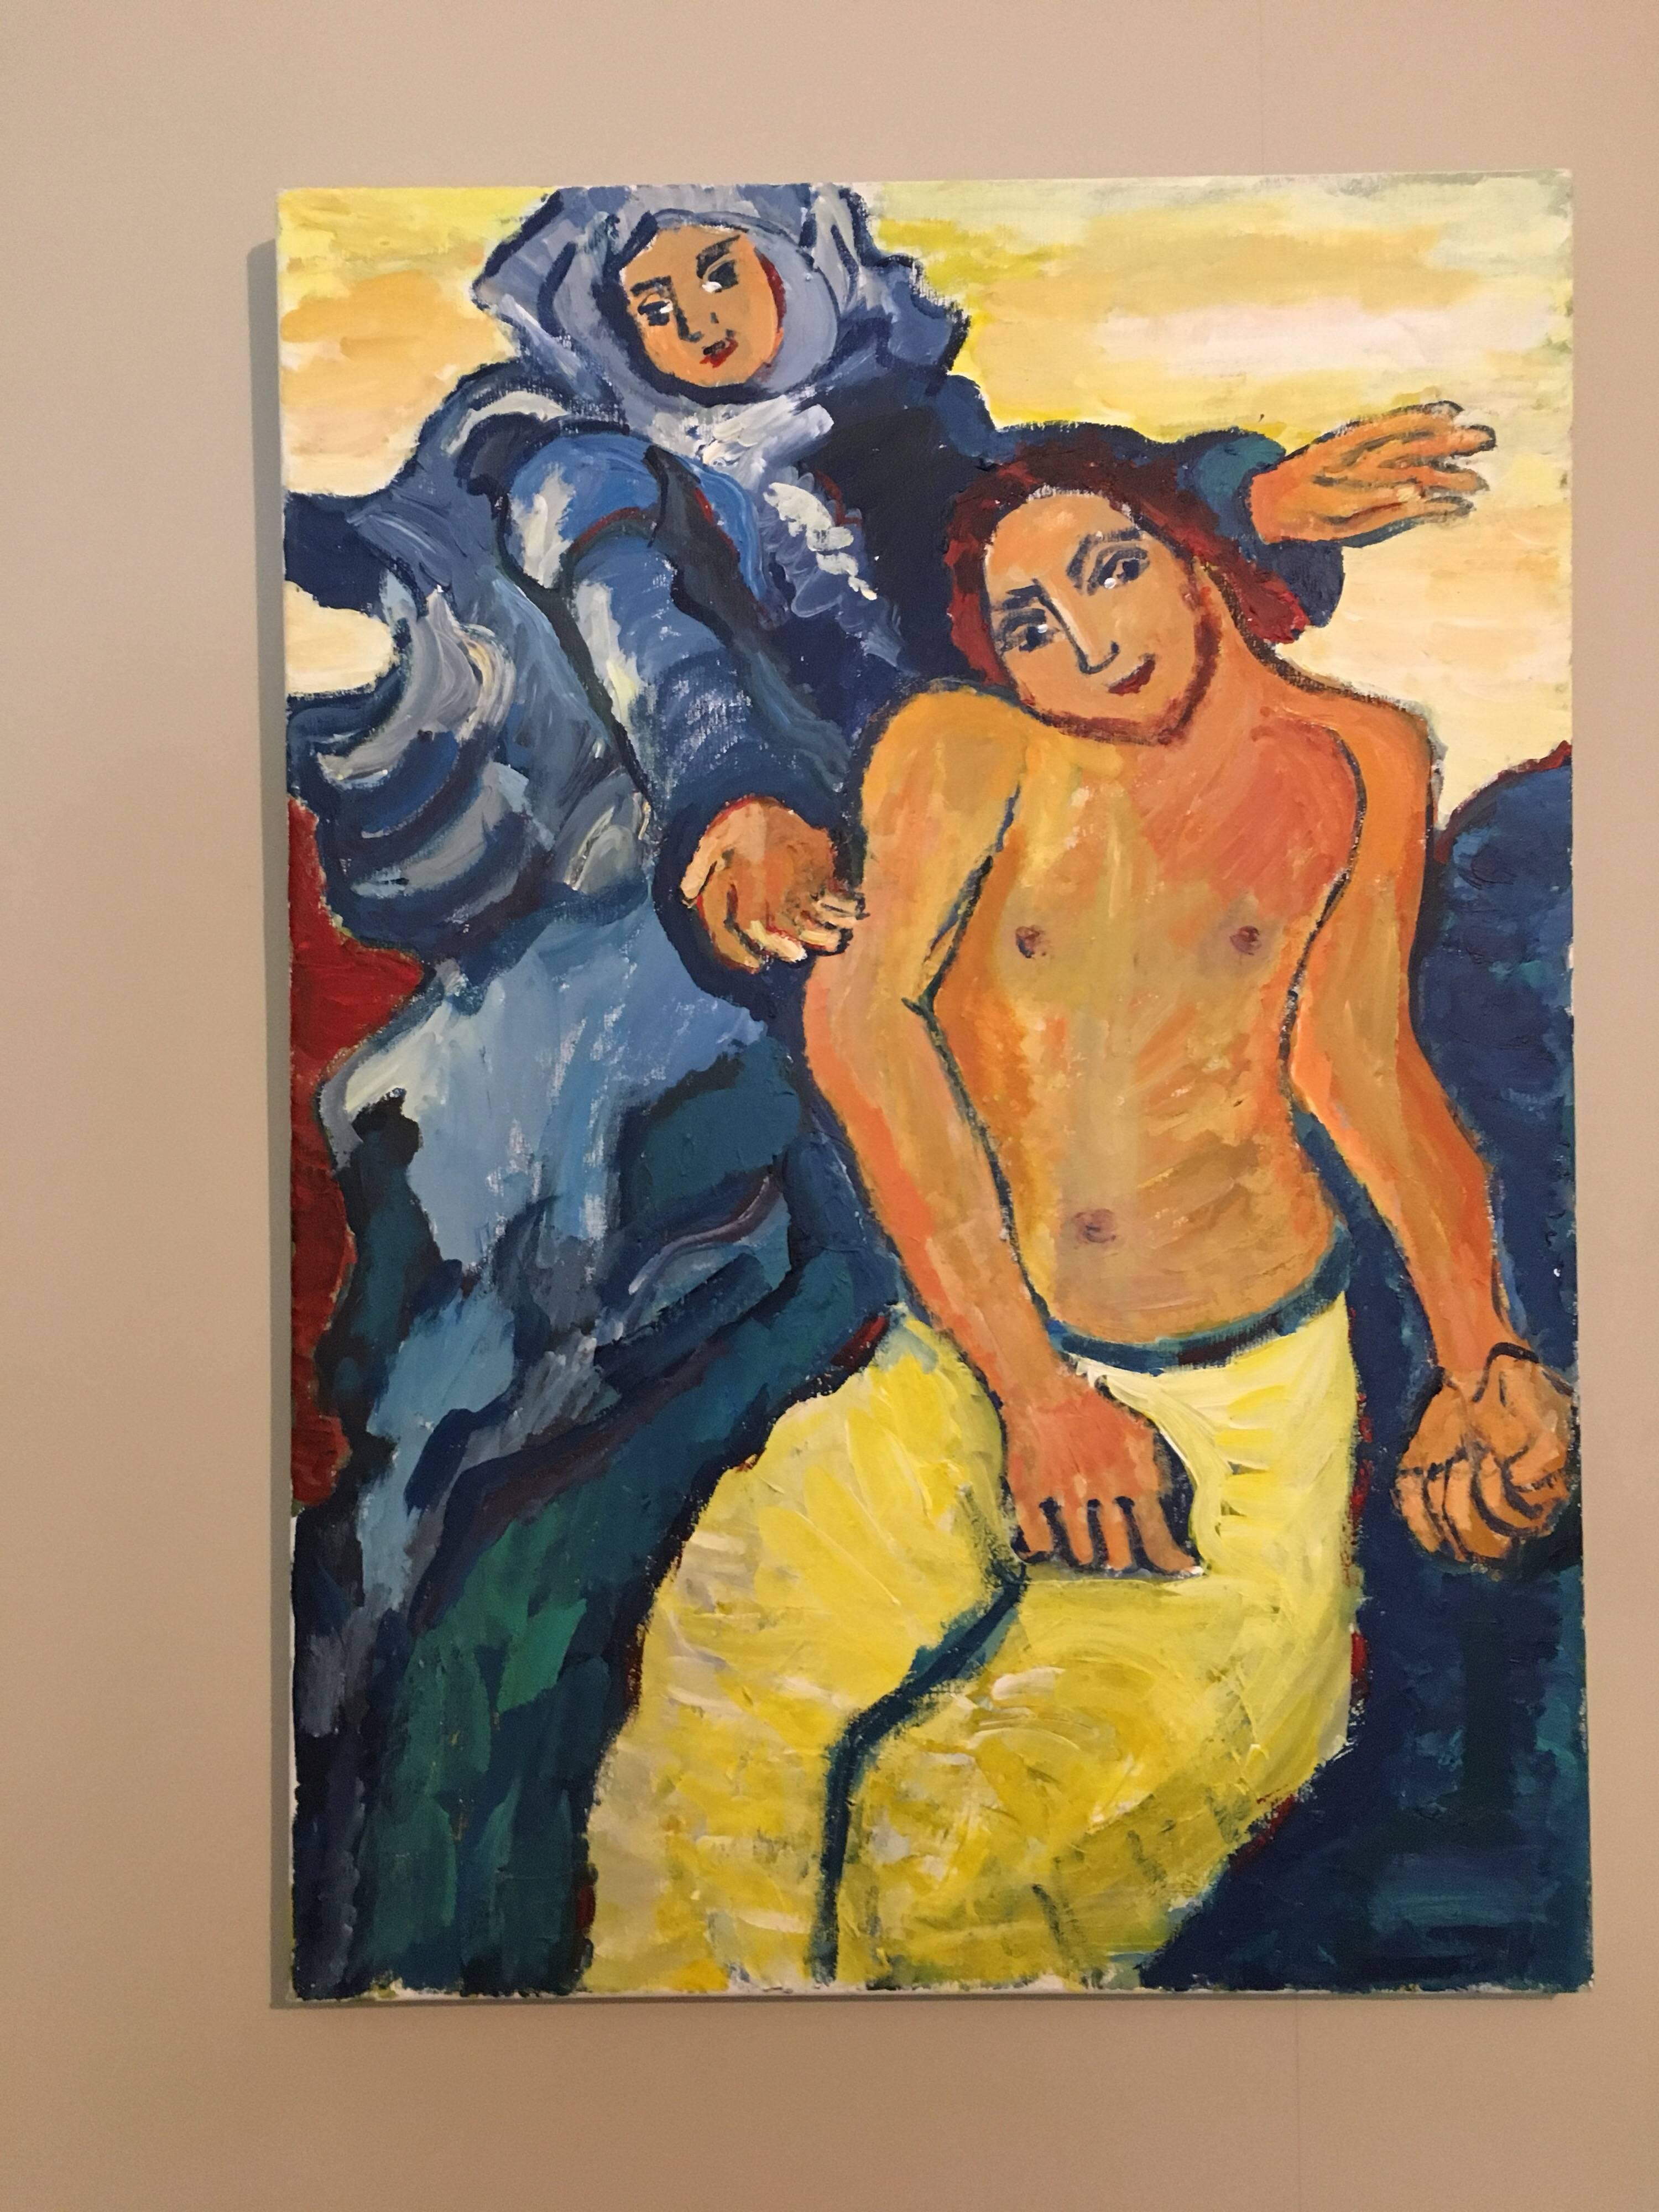 Middle Eastern Couple, Dancing, Impressionist Oil Painting
by Pamela Cawley, British 20th century
oil painting on canvas, unframed

canvas: 27.5 x 19.5 inches 

Stunning original Impressionist oil painting by the 20th century British artist, Pamela